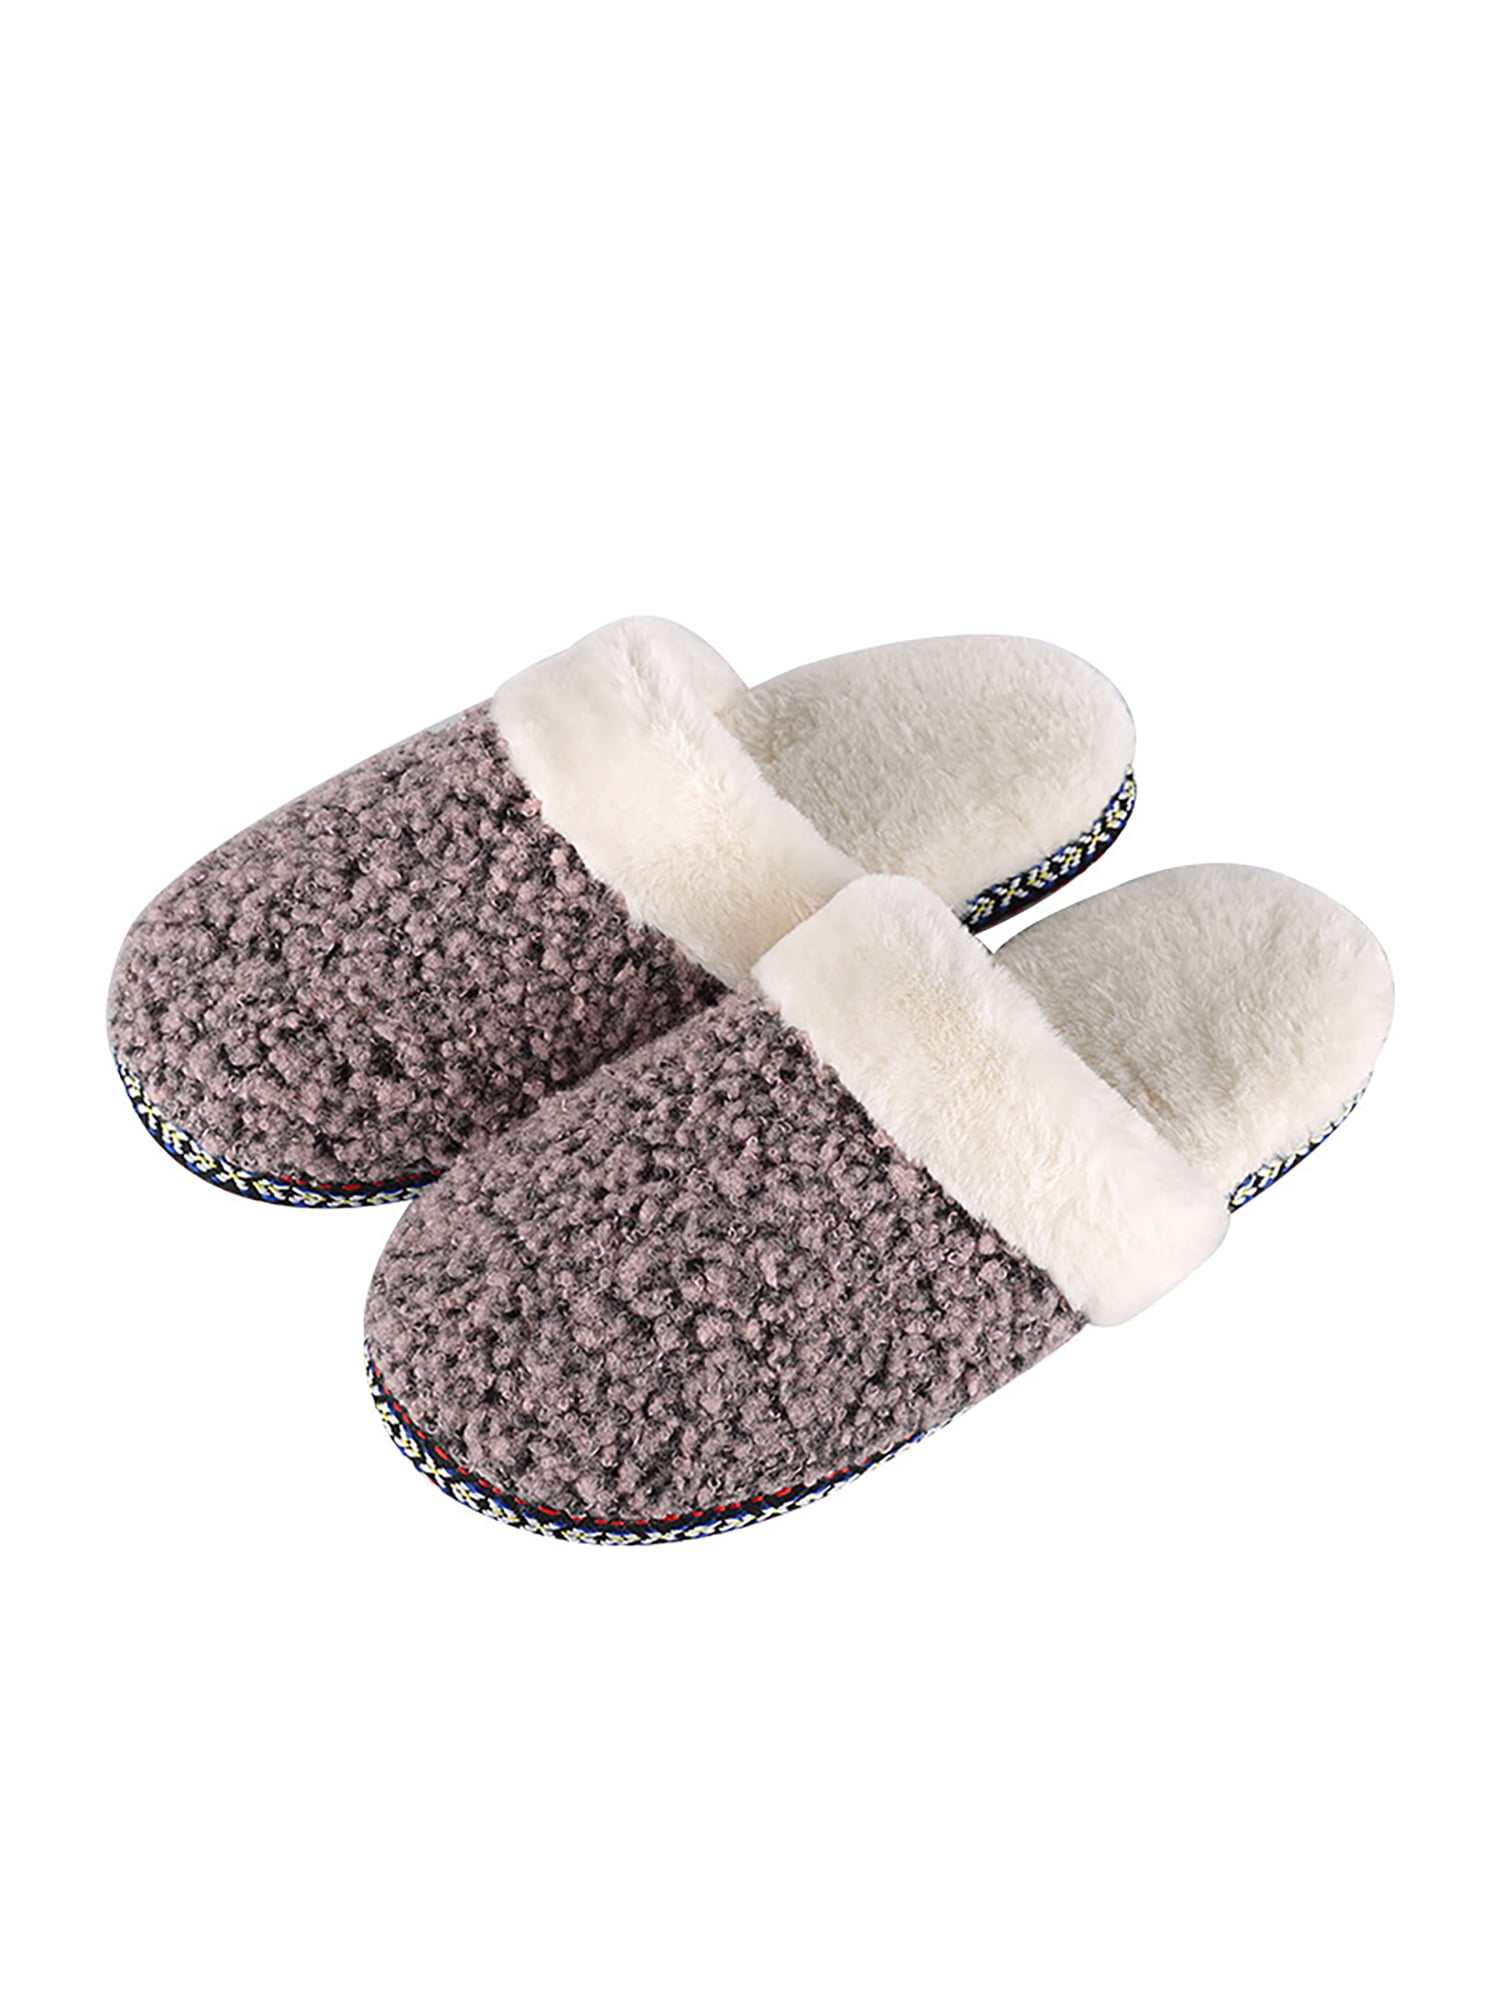 Details about   Home Slippers Shoes Non-slip Soft Winter Warm Indoor Bedroom Sheep Patterned New 